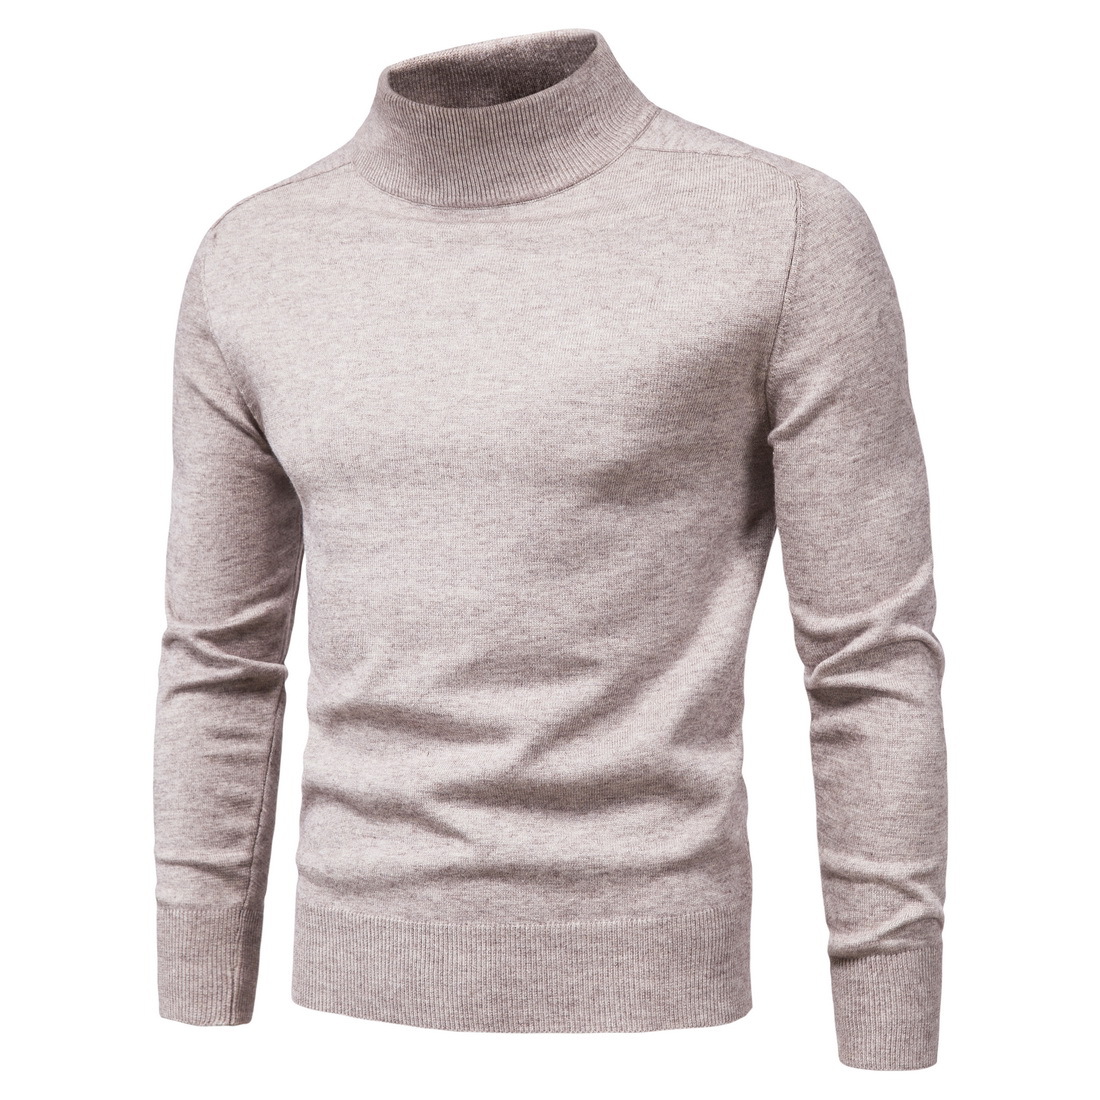 Autumn New Foreign Trade Men Solid Half-Collar Slim Sweater Bottoming Shirt Sweater